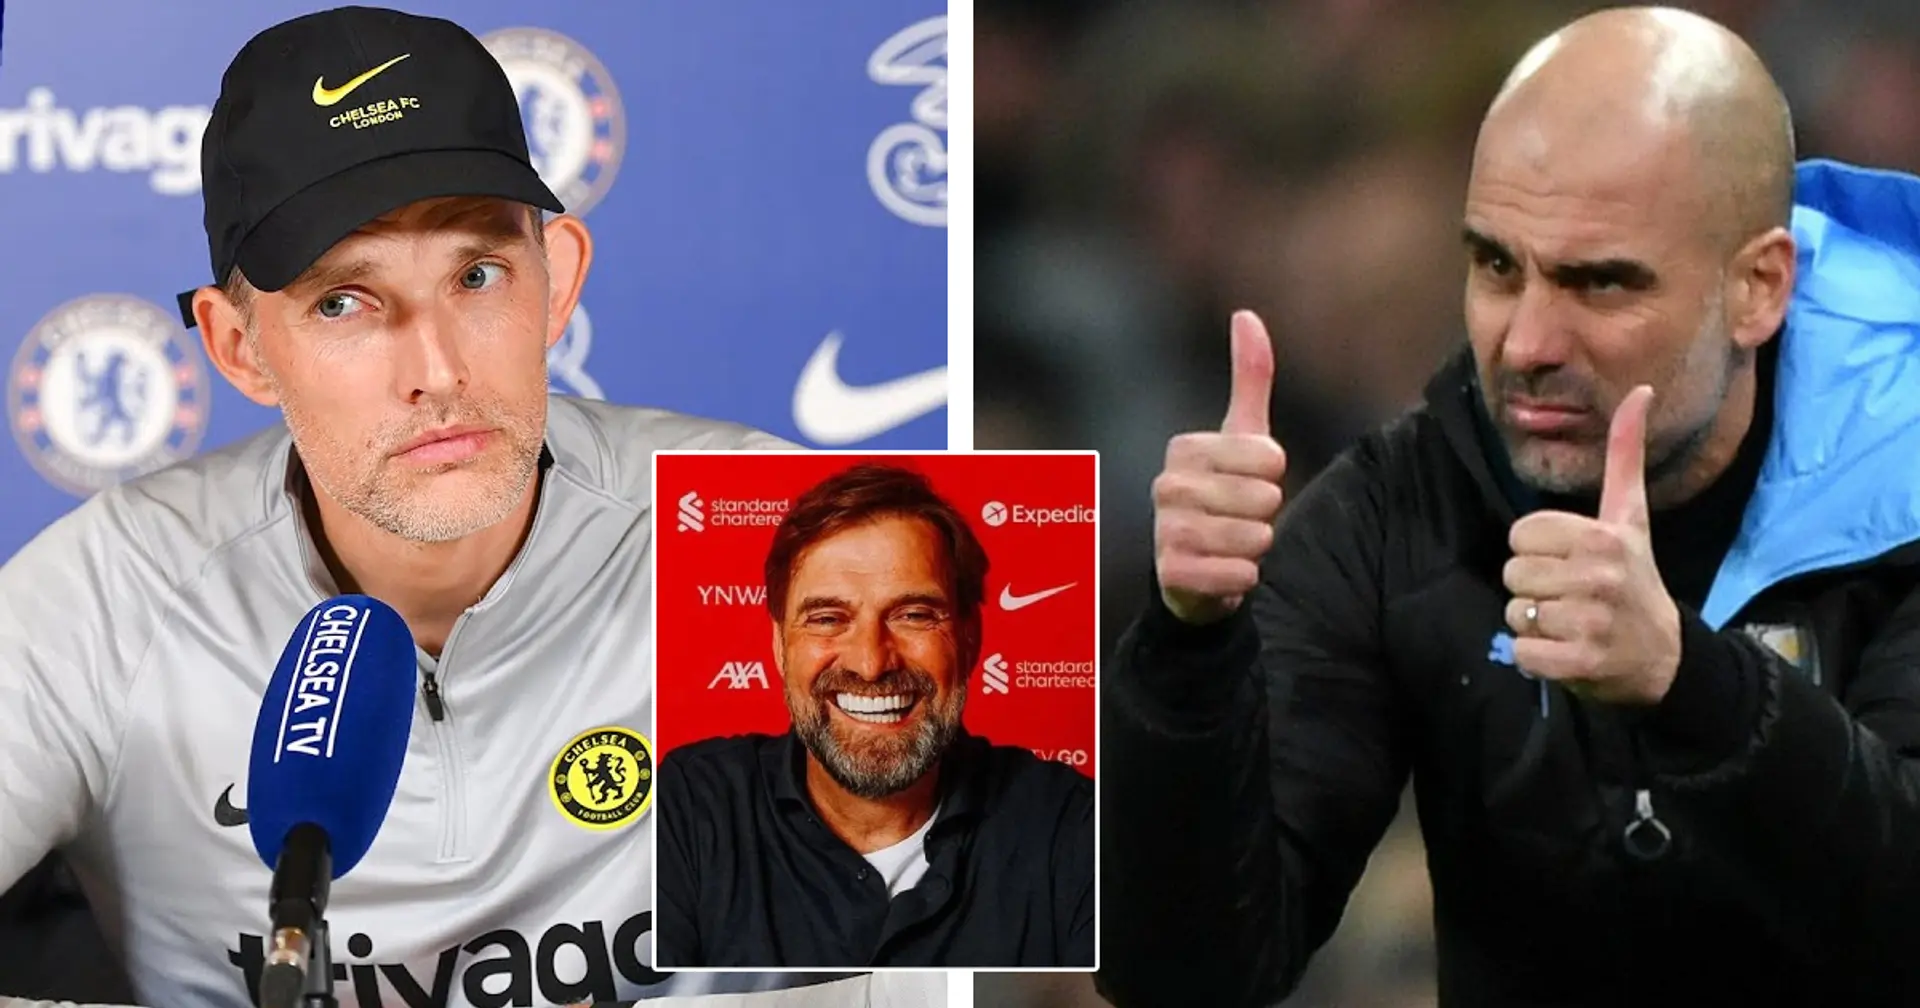 Thomas Tuchel agrees with Guardiola: 'You have the feeling the whole country loves Liverpool' 